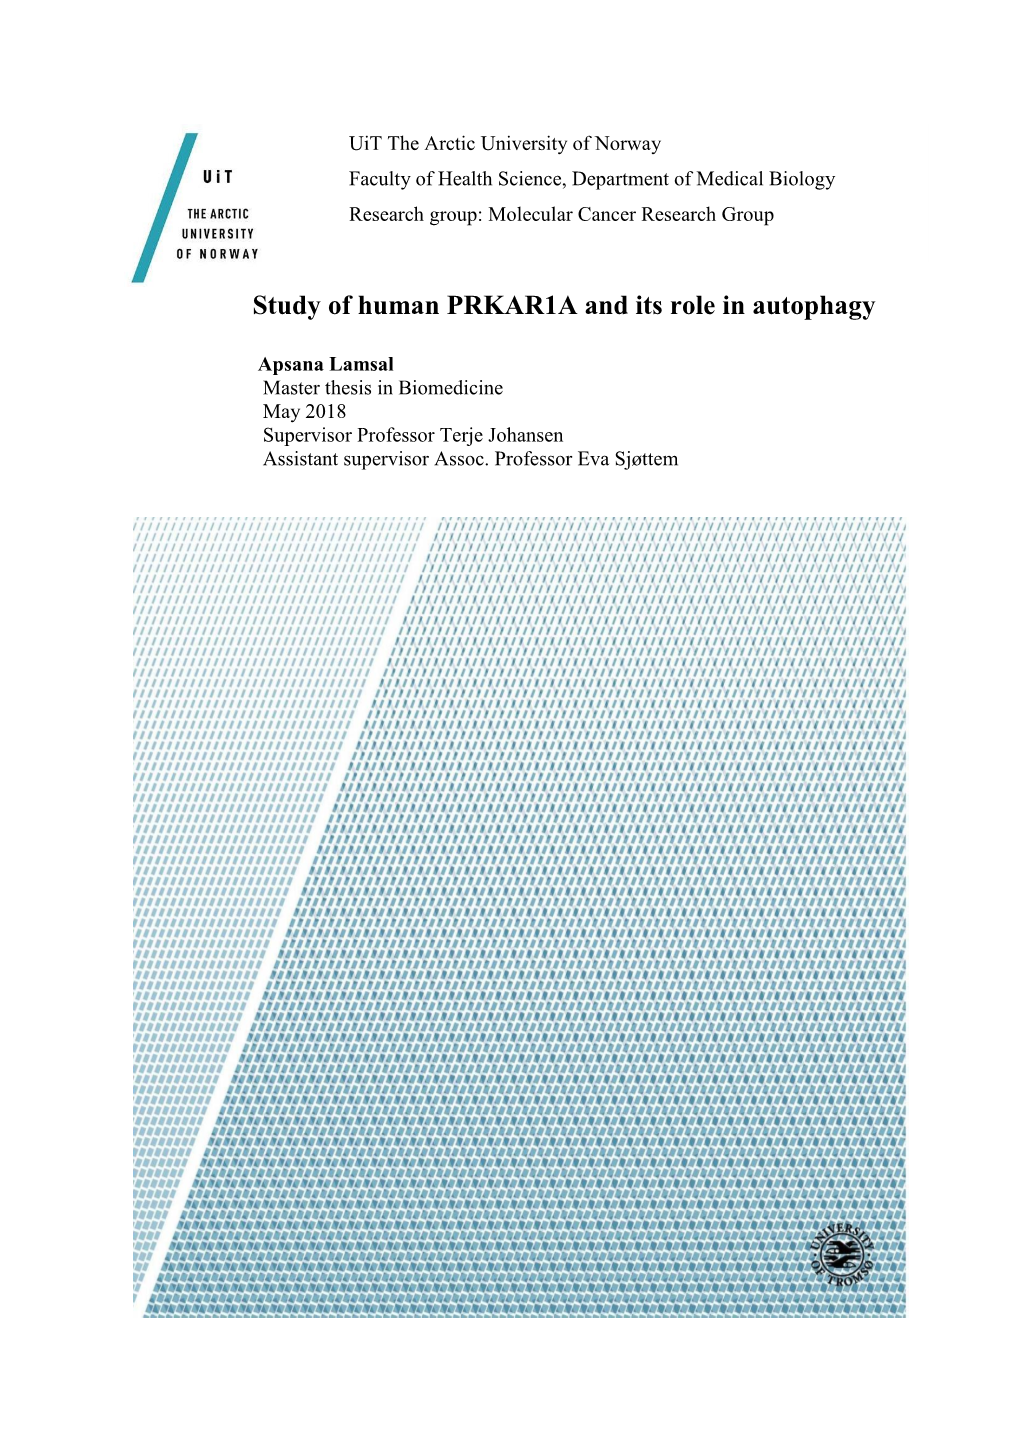 Study of Human PRKAR1A and Its Role in Autophagy